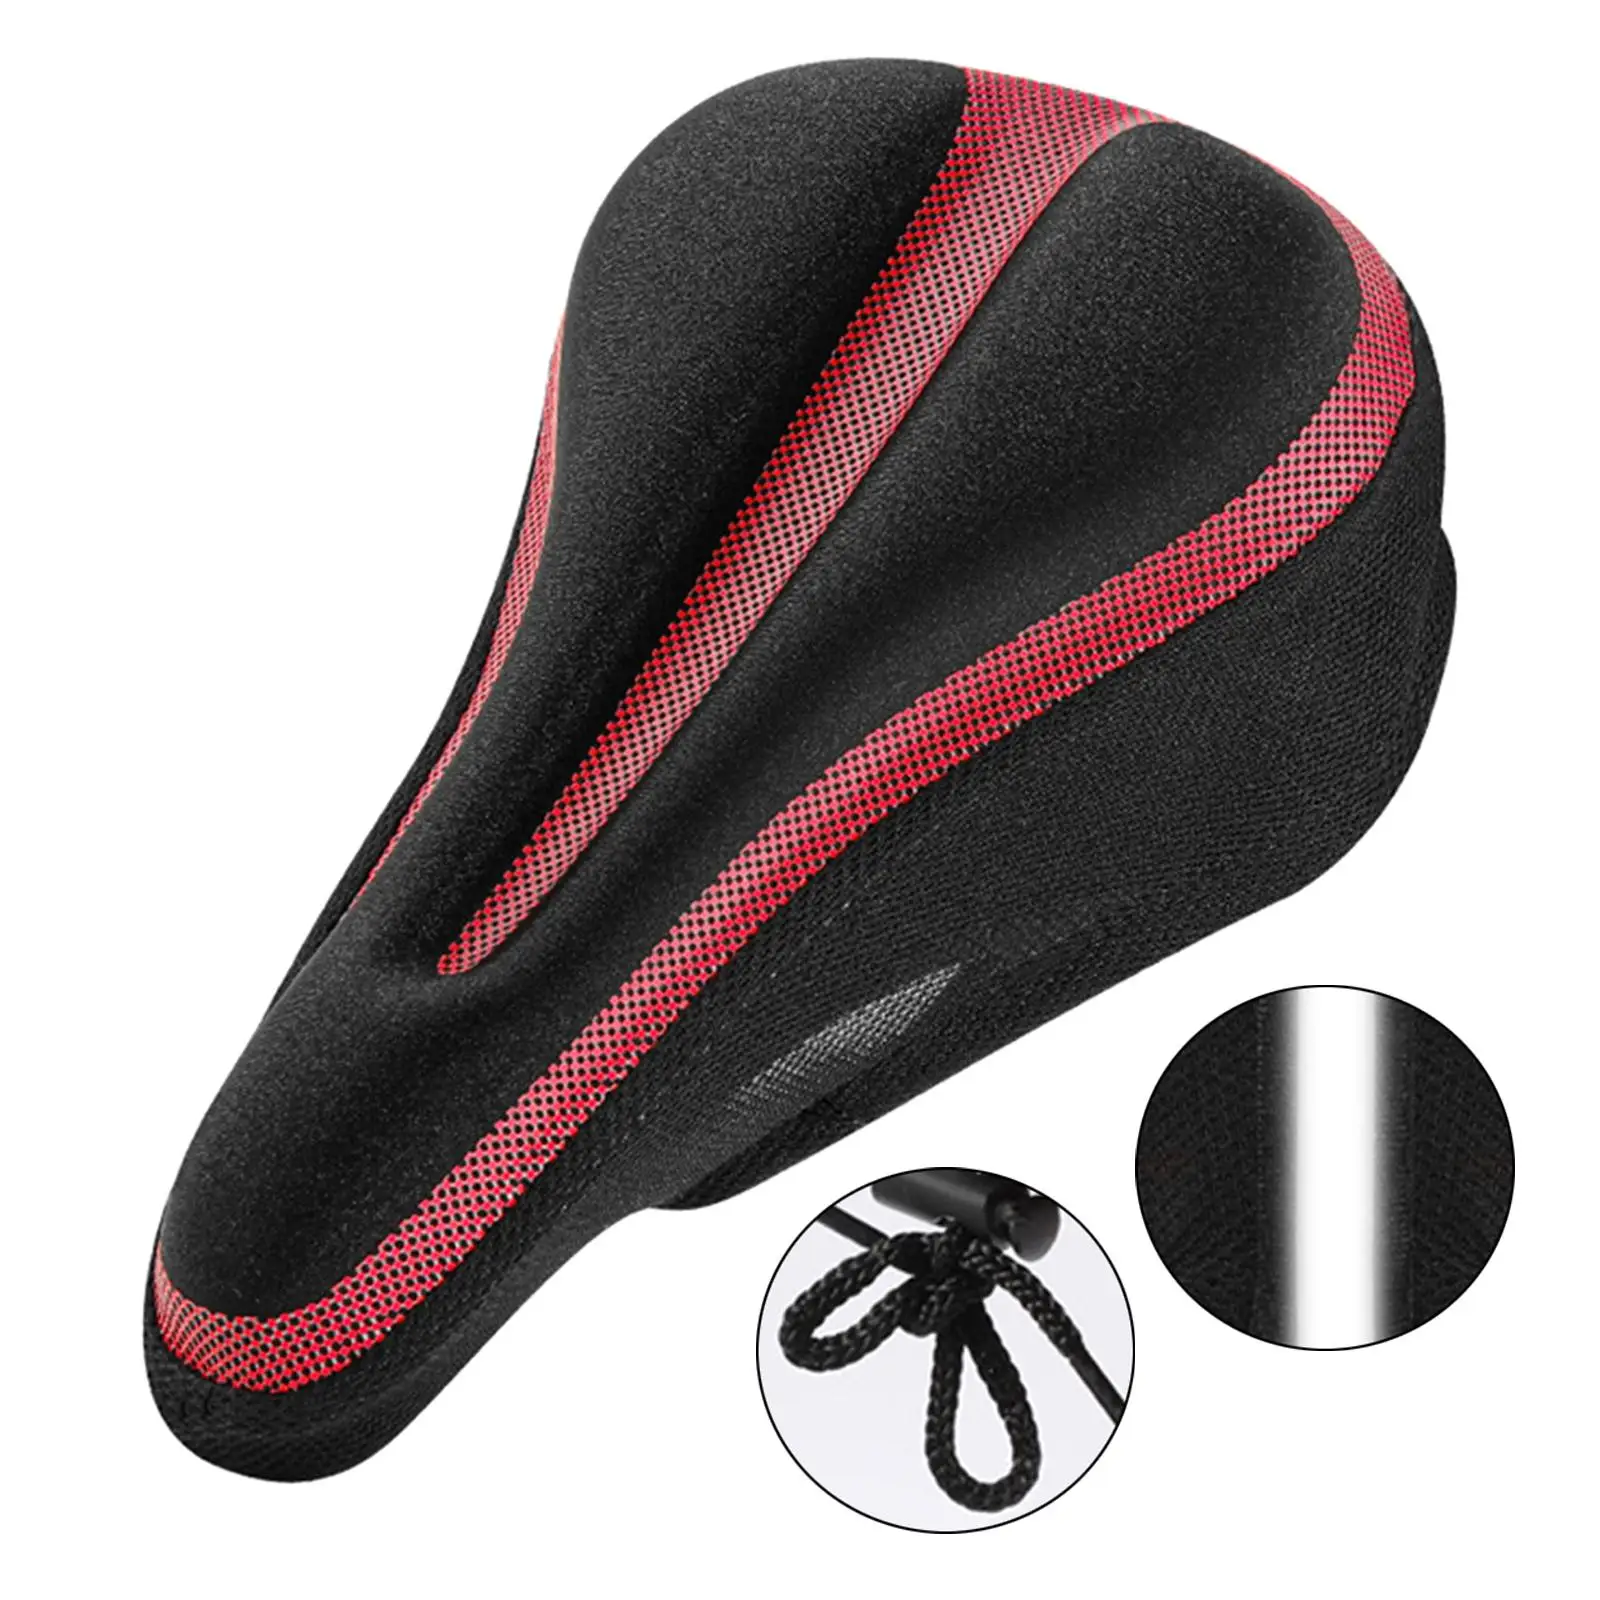 Seat Silicone Relieves The Driving Pressure,  Saddle Pad with Reflective Stripes  Seats Comfort for Mountain Bike